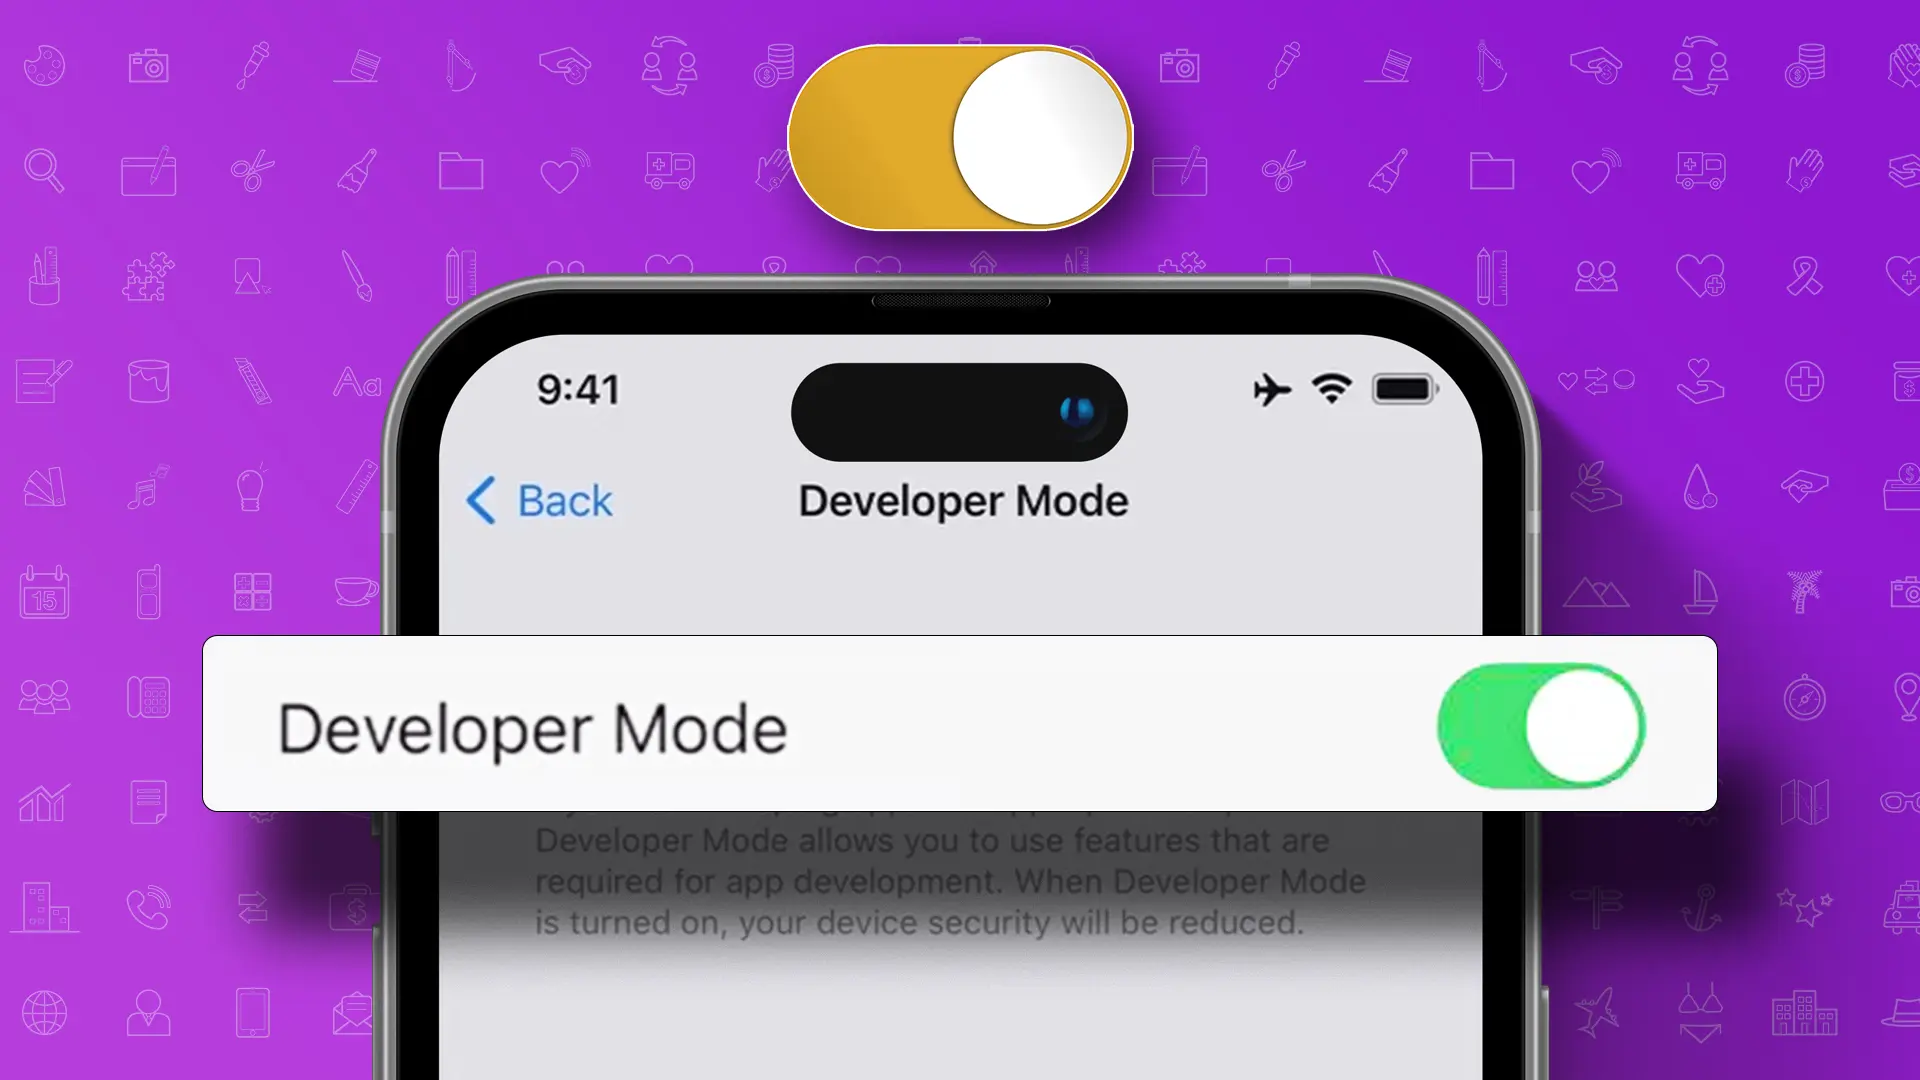 Enable Developer Mode on iPhone